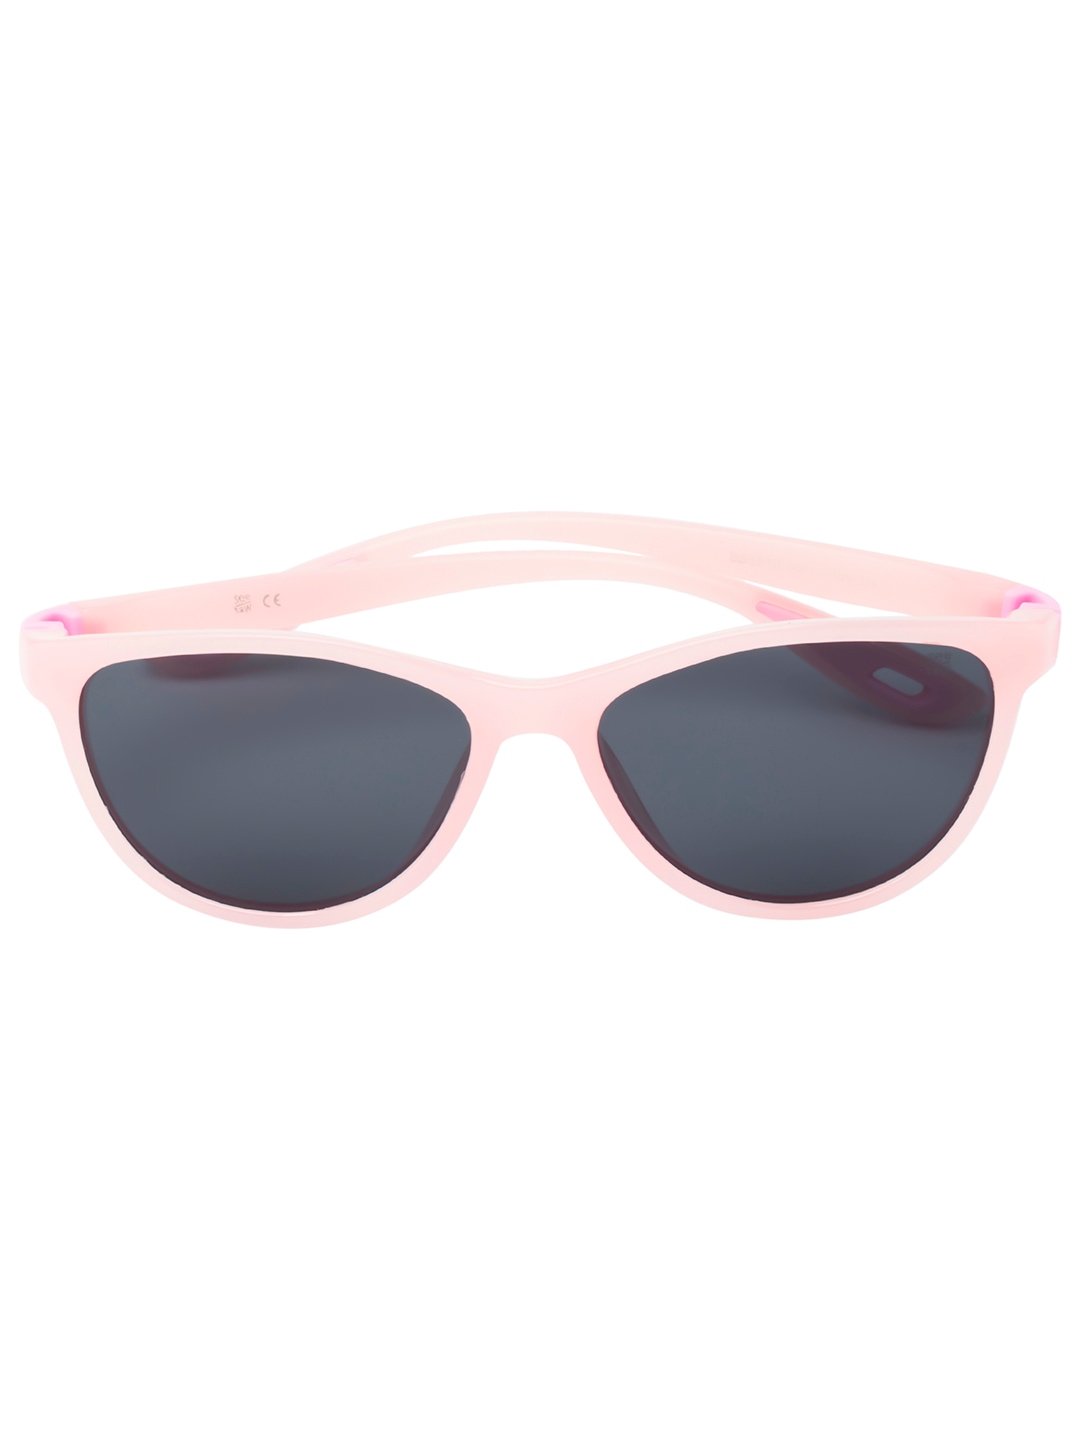 

SEESAW Girls Cateye Sunglasses with Polarised and UV Protected Lens SS3510C150/13, Black